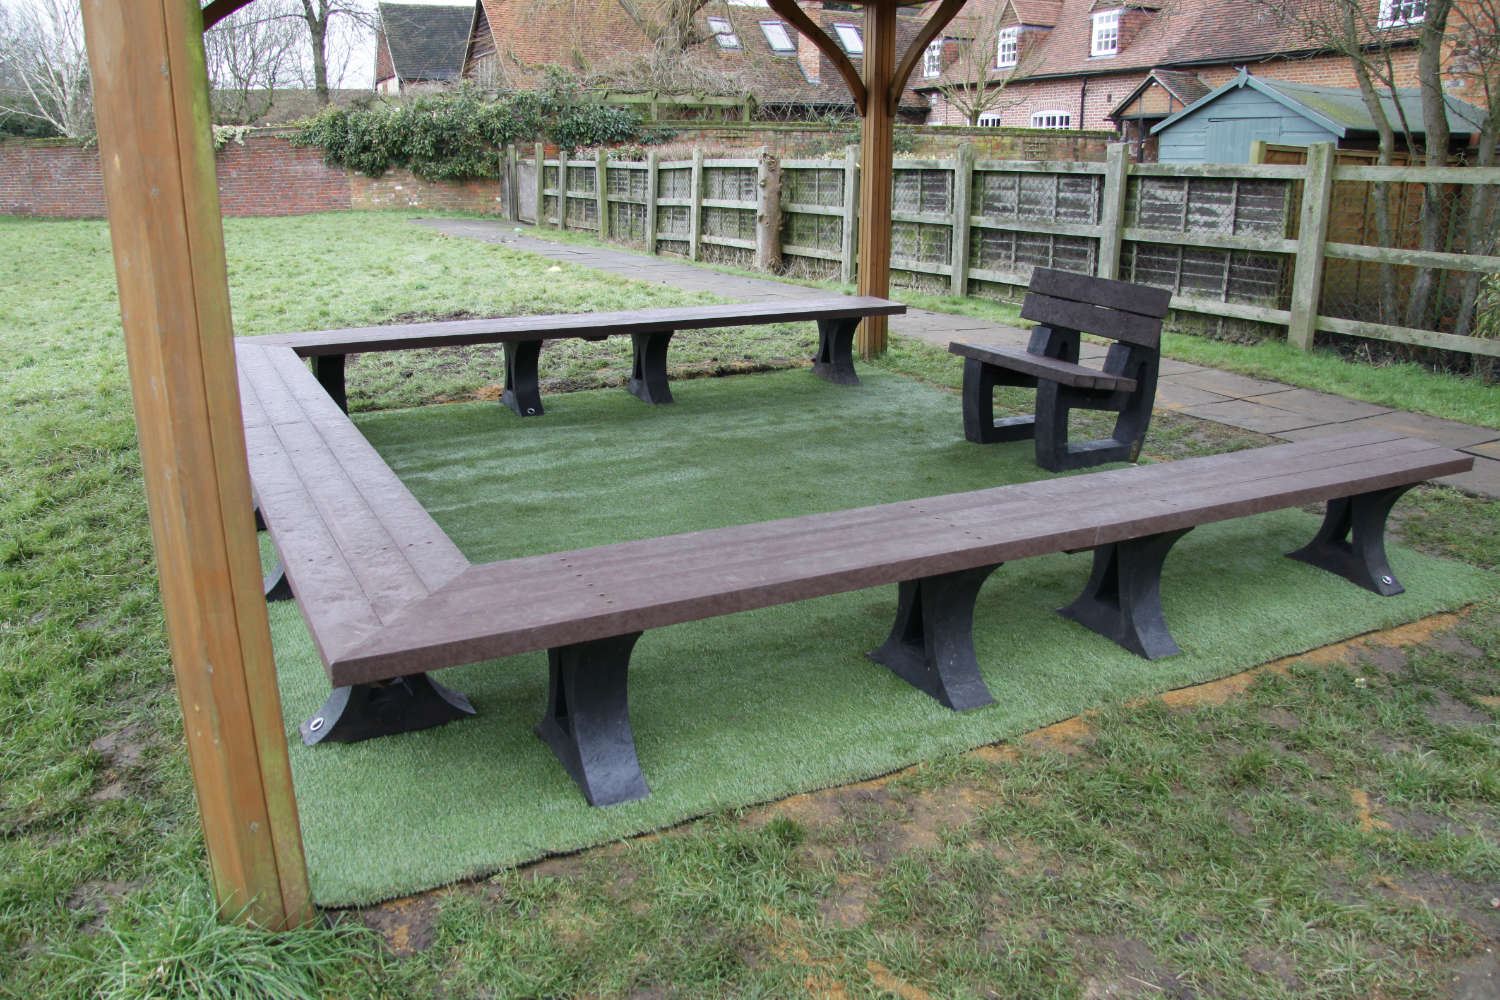 Recycled plastic benches arranged in an open square shape with a seat on the fourth side. Set on artificial grass.